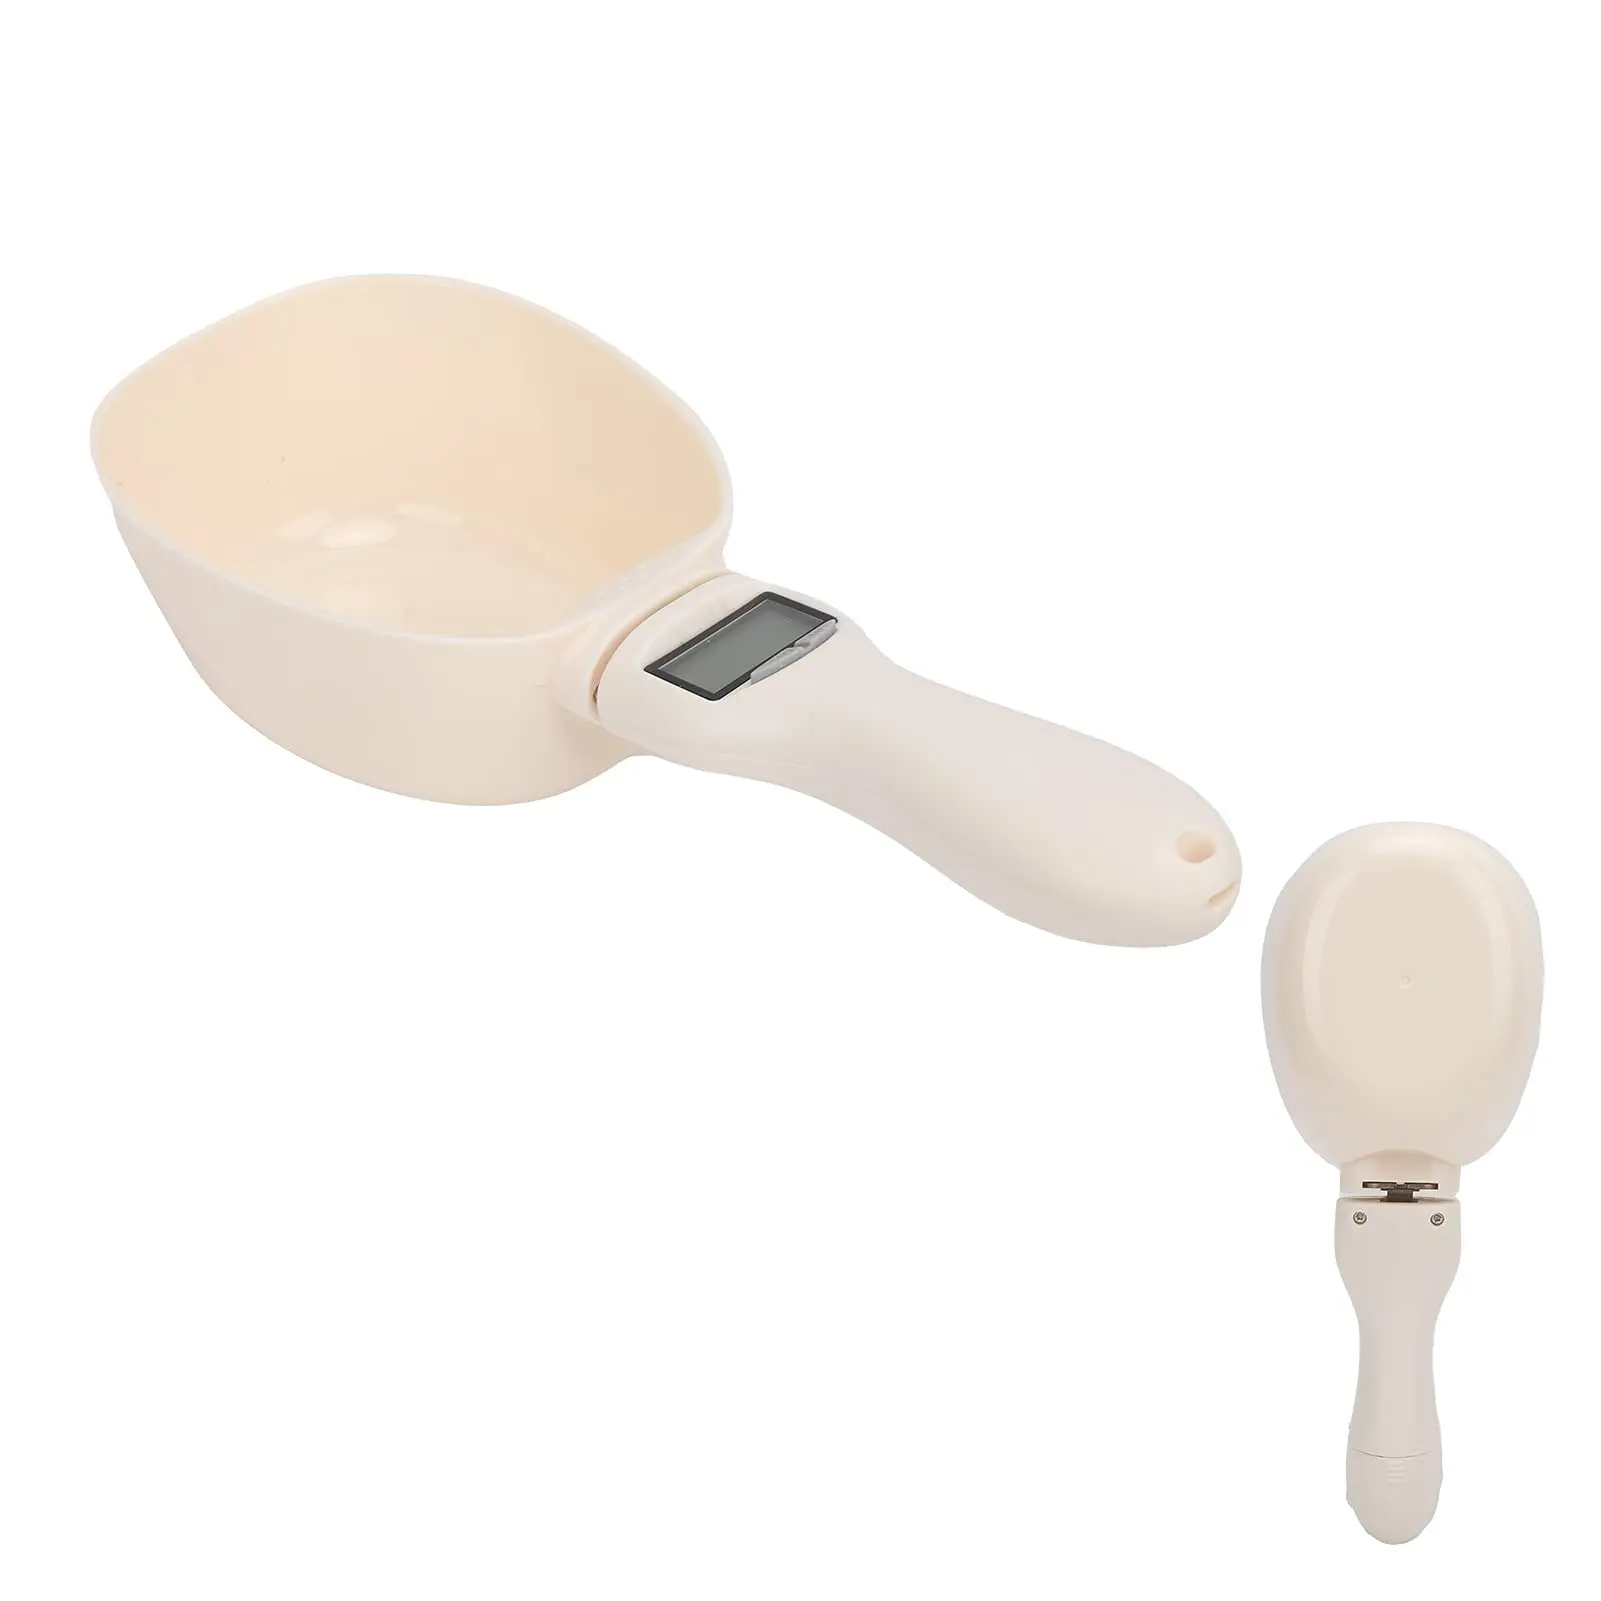 New Pet Electronic Spoon Scale for Cat Dog Nutrition Food Baking Weighing High-precision Household Kitchen Measuring Tools images - 5